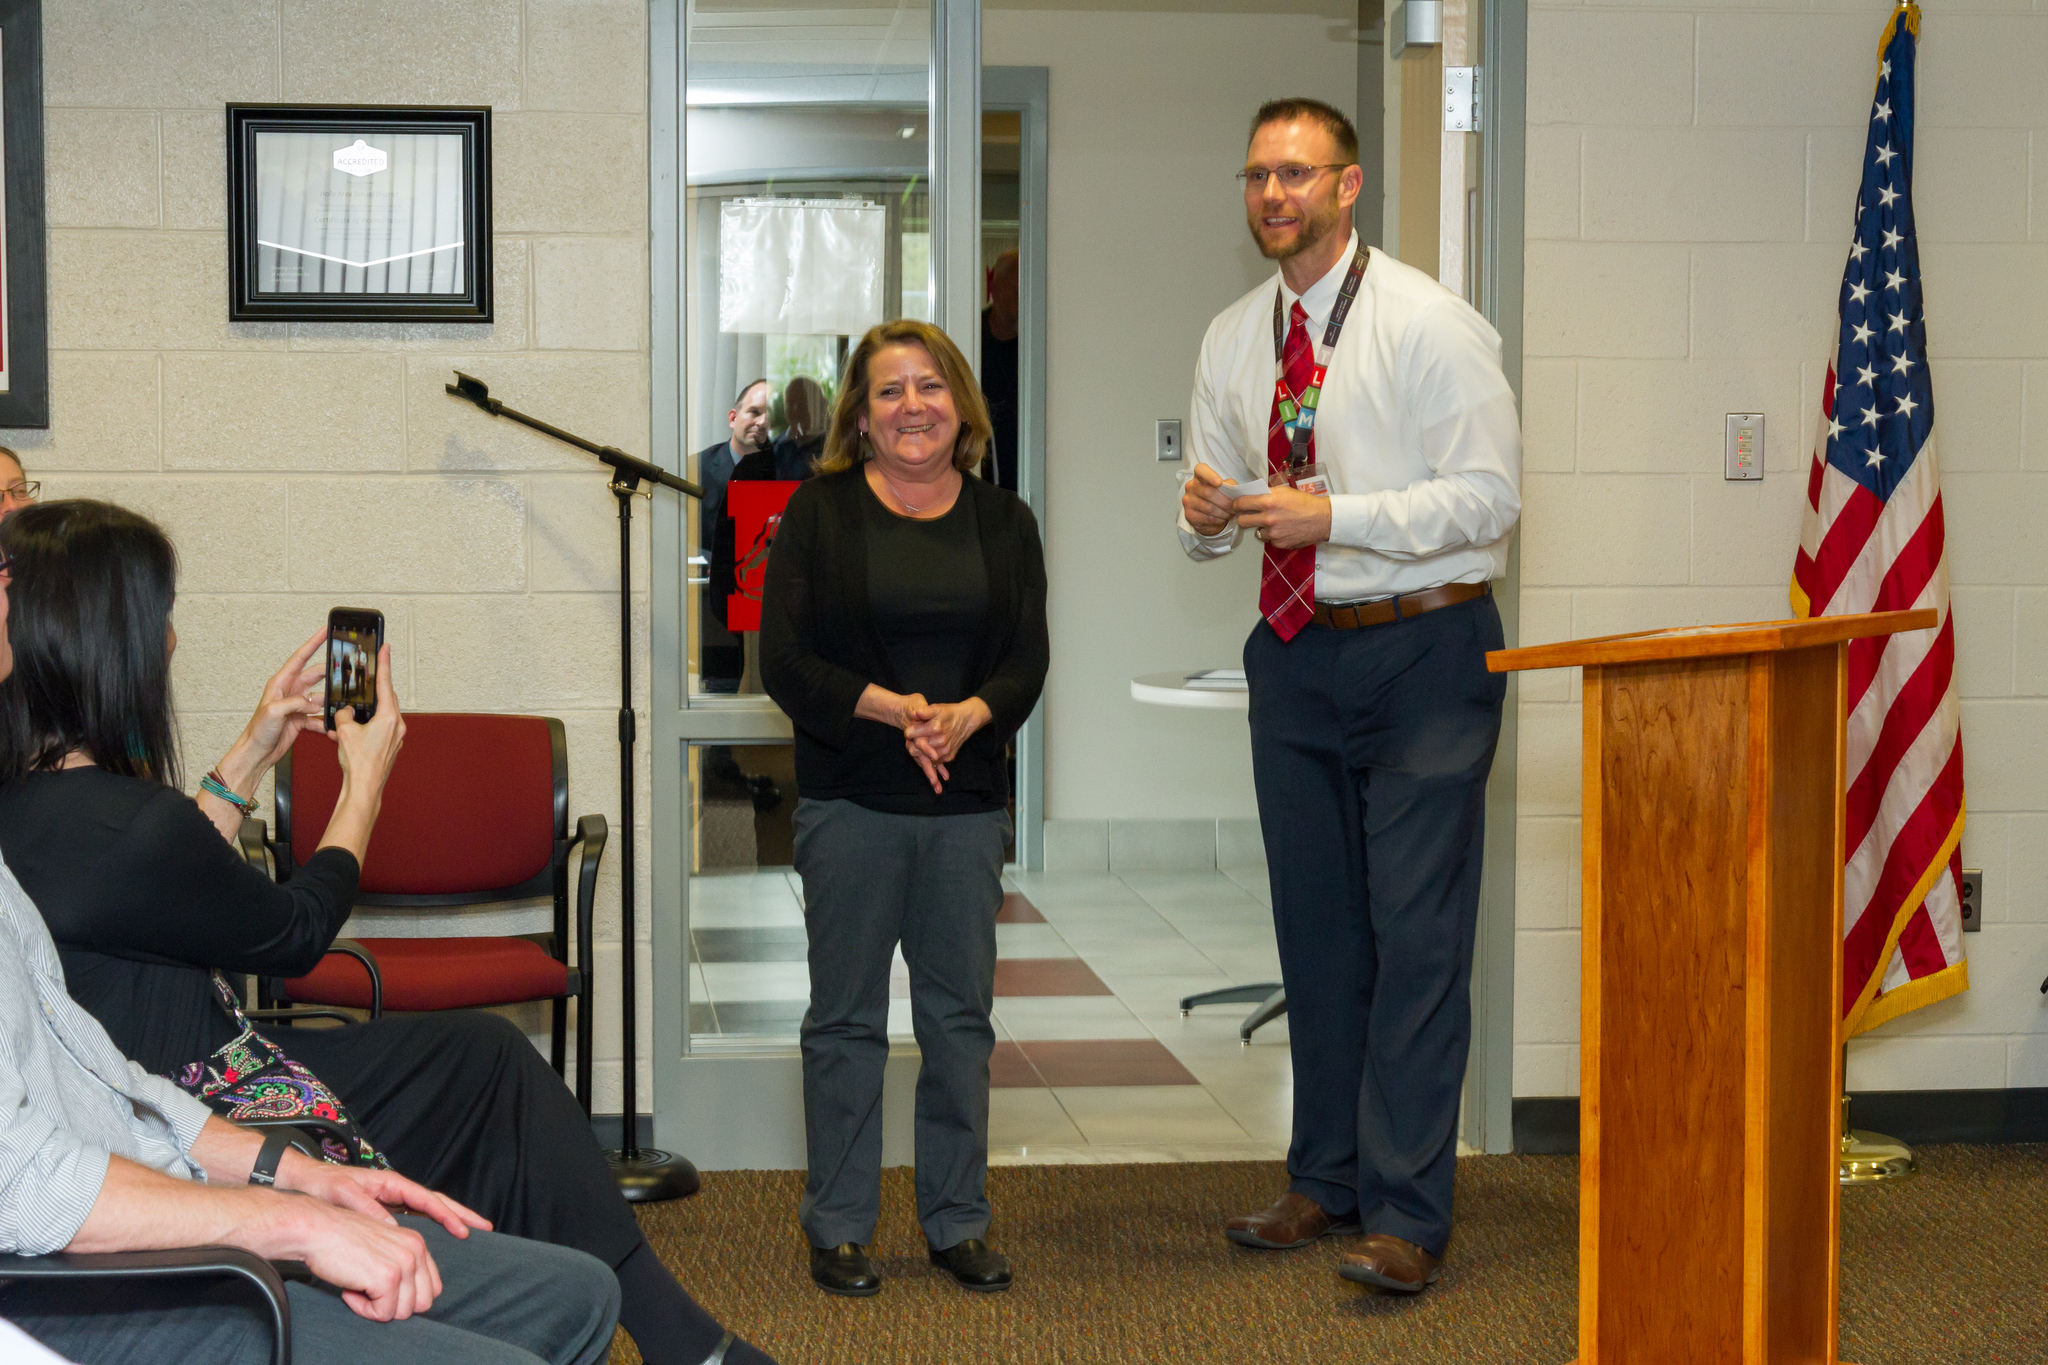 Mrs. Keener receiving her award with Mr. Curl